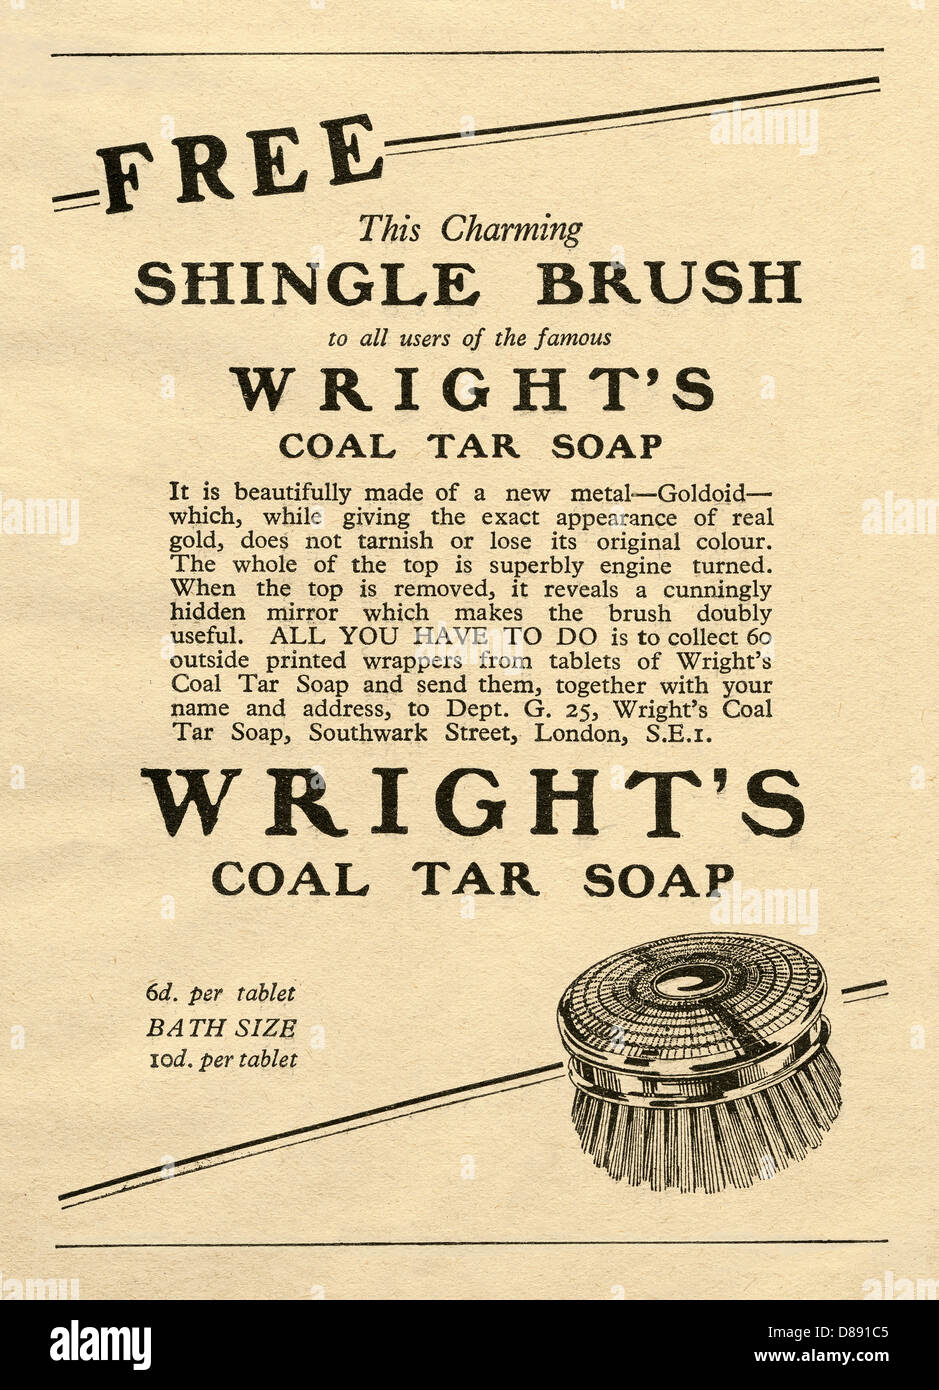 1928 advert for Wright's coal tar soap that includes an offer of a free metal 'shingle' brush by collecting the wrappers Stock Photo